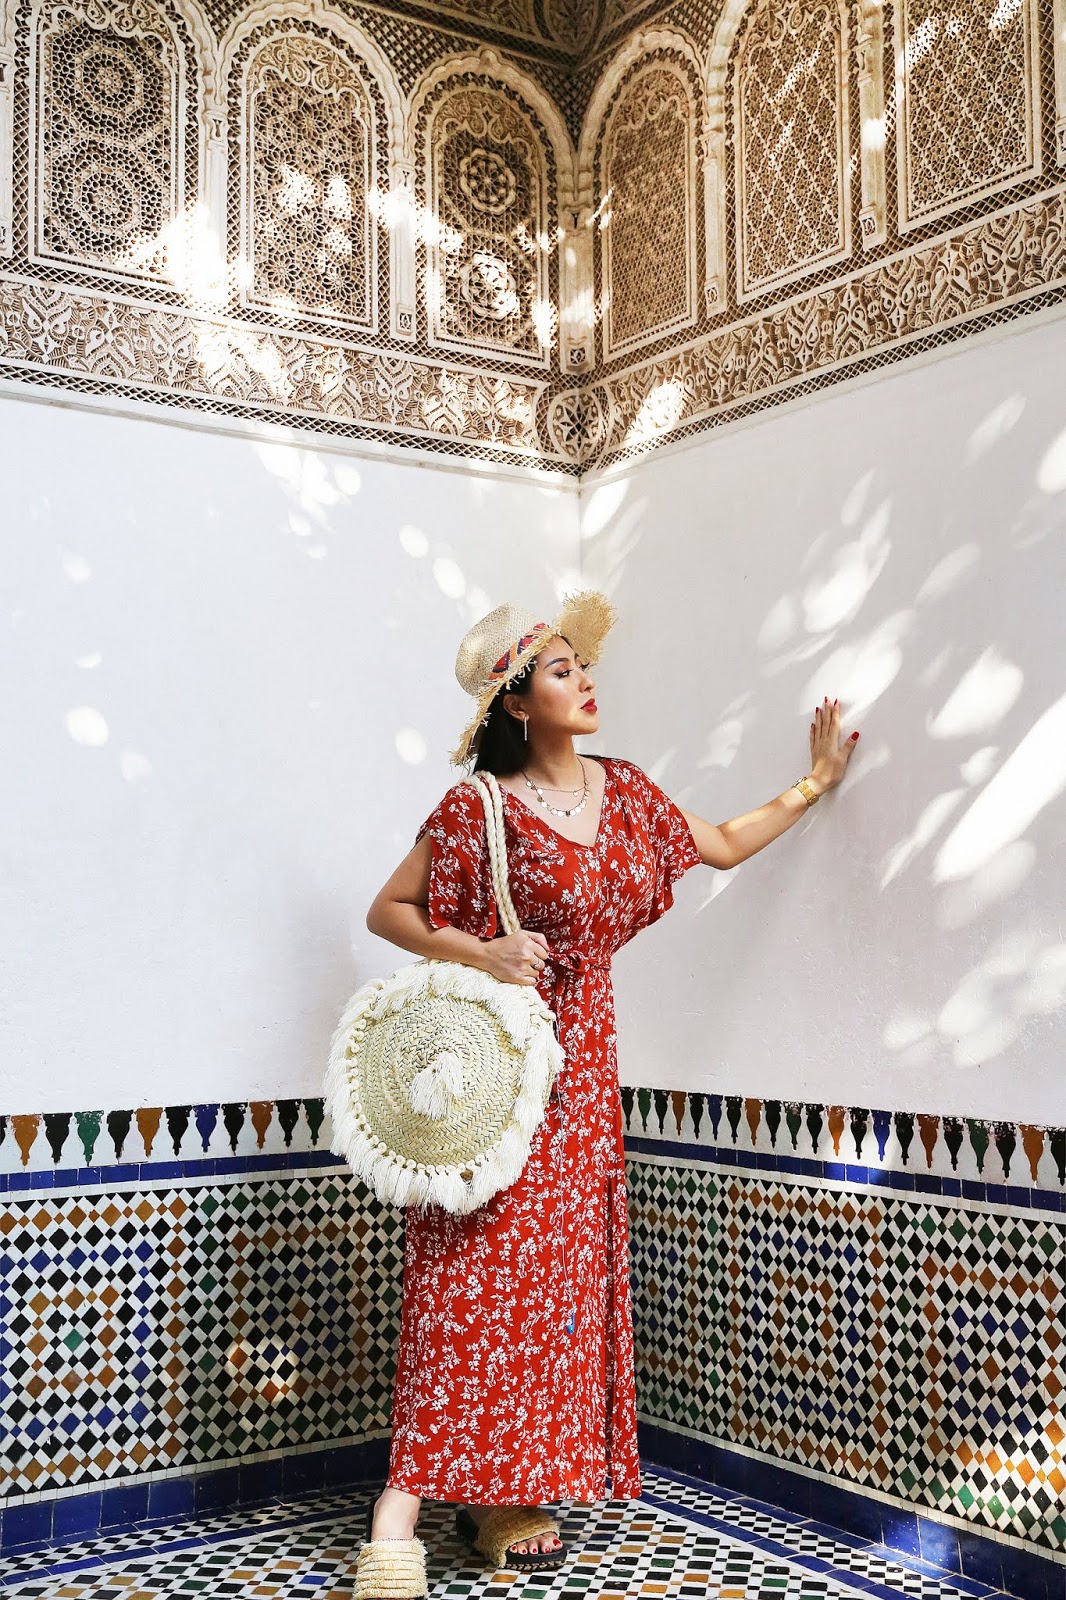 My 4½ Things to Do with 24 Hours in Marrakech, Morocco